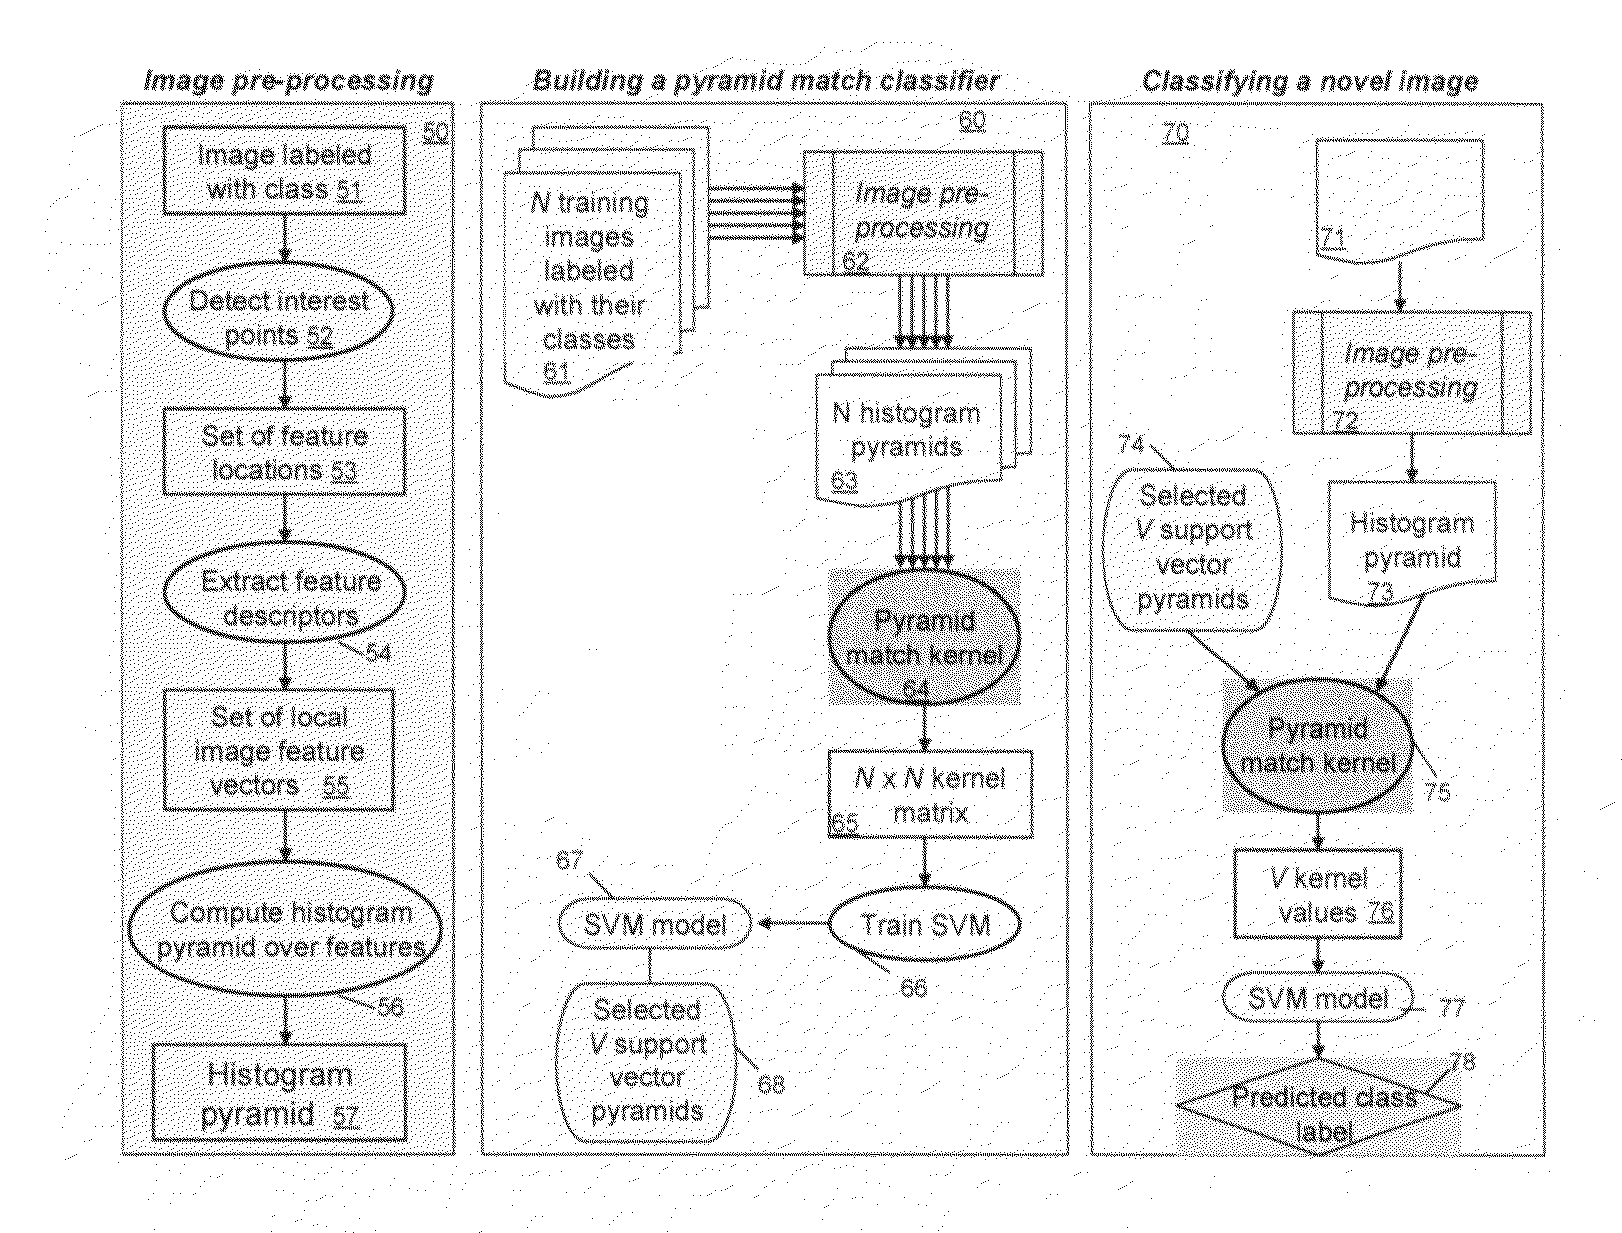 Pyramid match kernel and related techniques